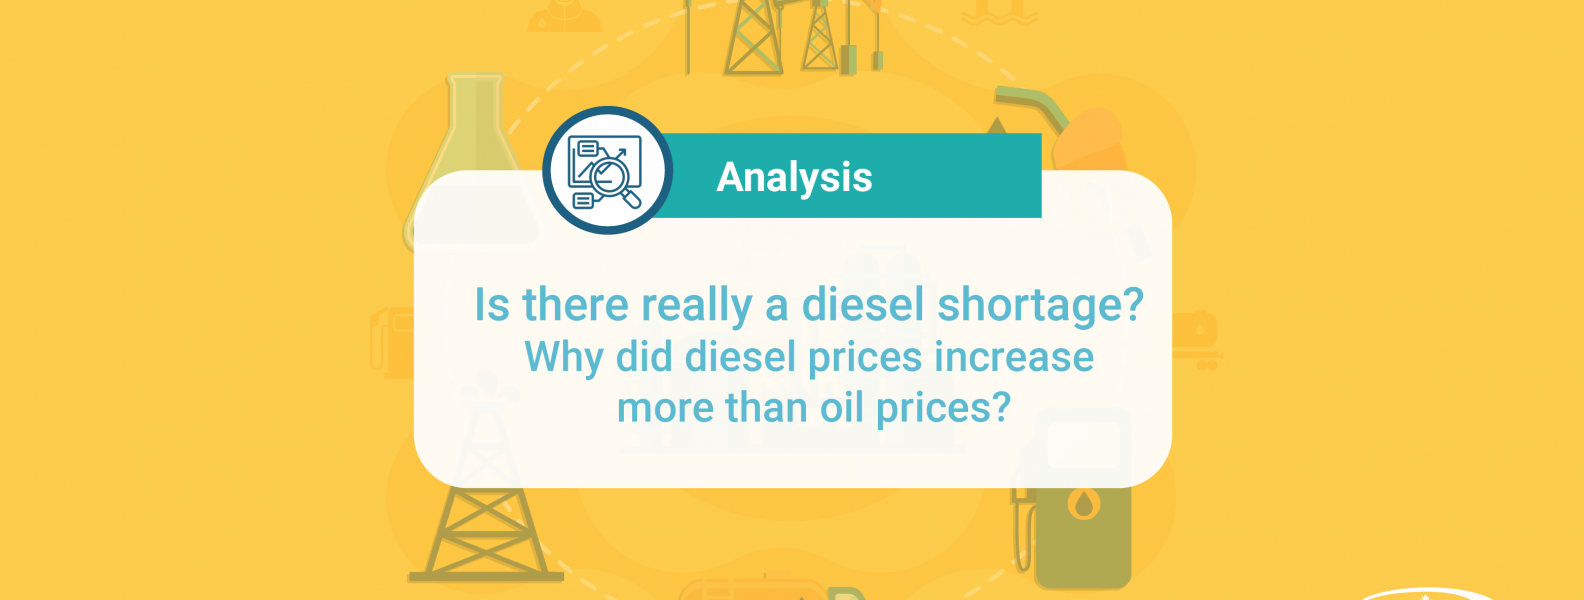 [Infographic ] Is there really a diesel shortage? Why did diesel prices